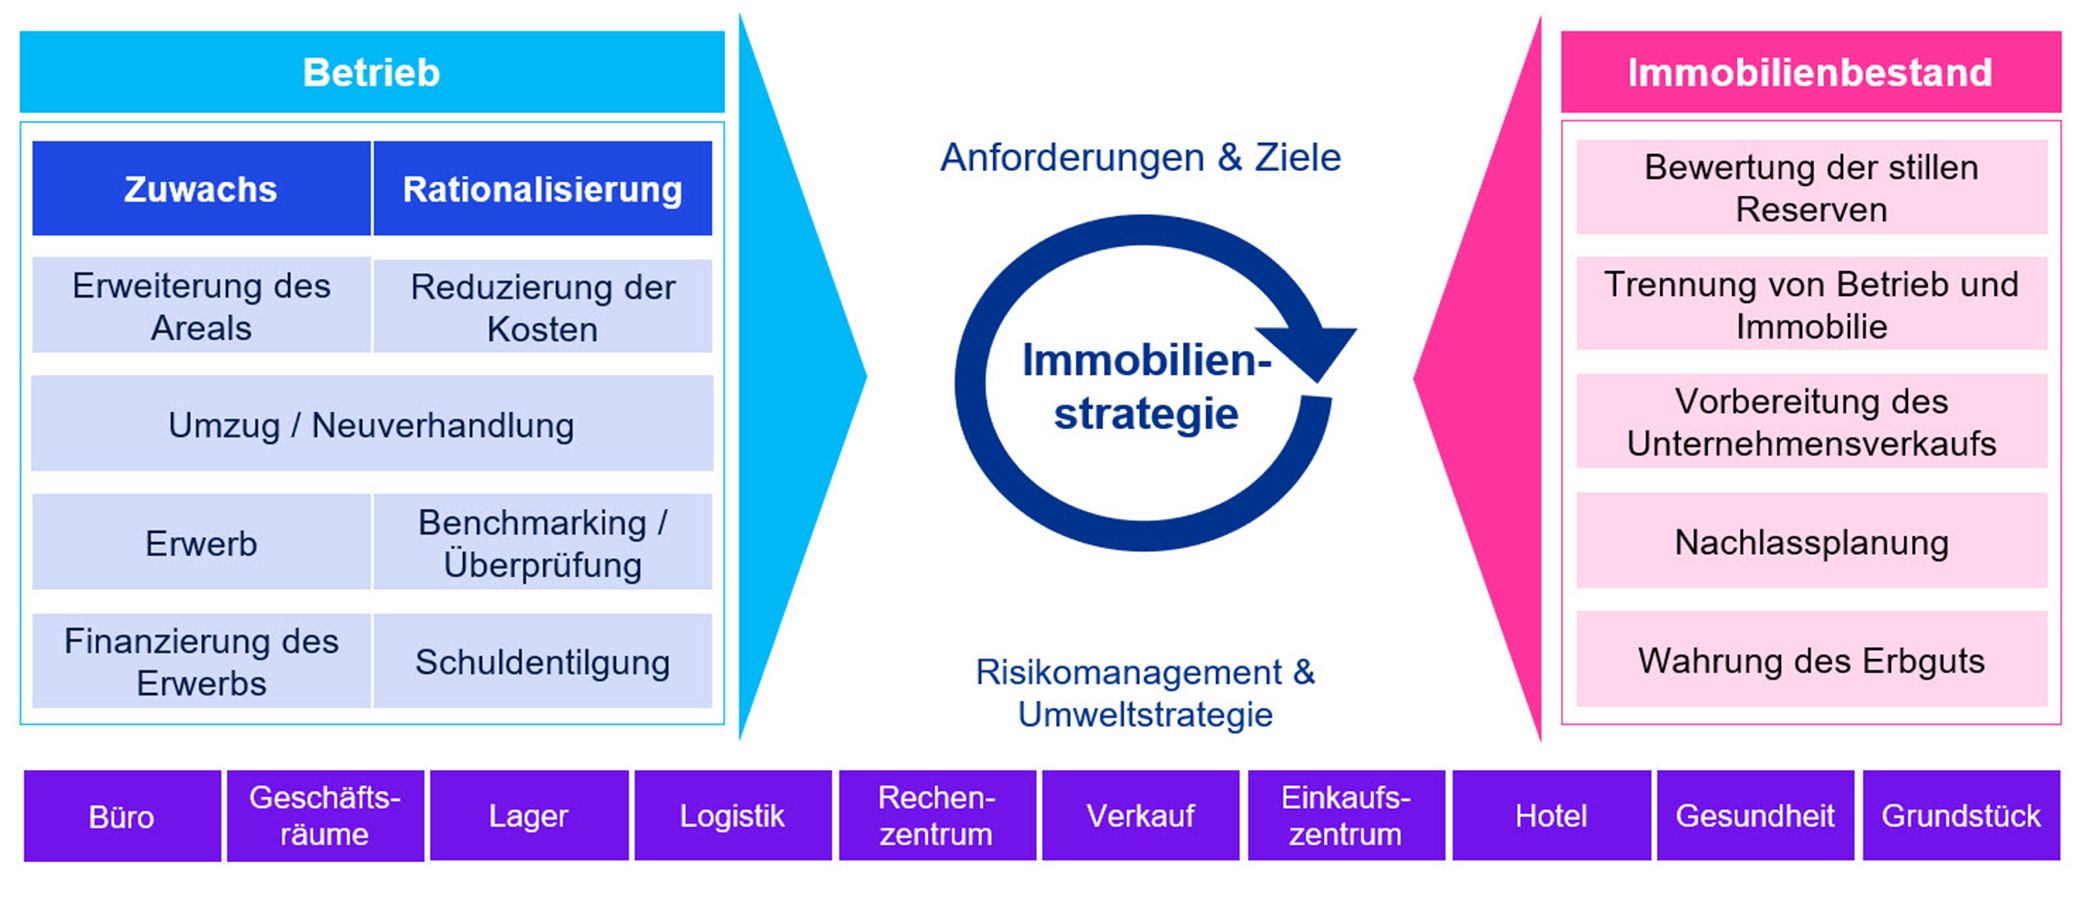 Unsere Lösung: Corporate Real Estate Management